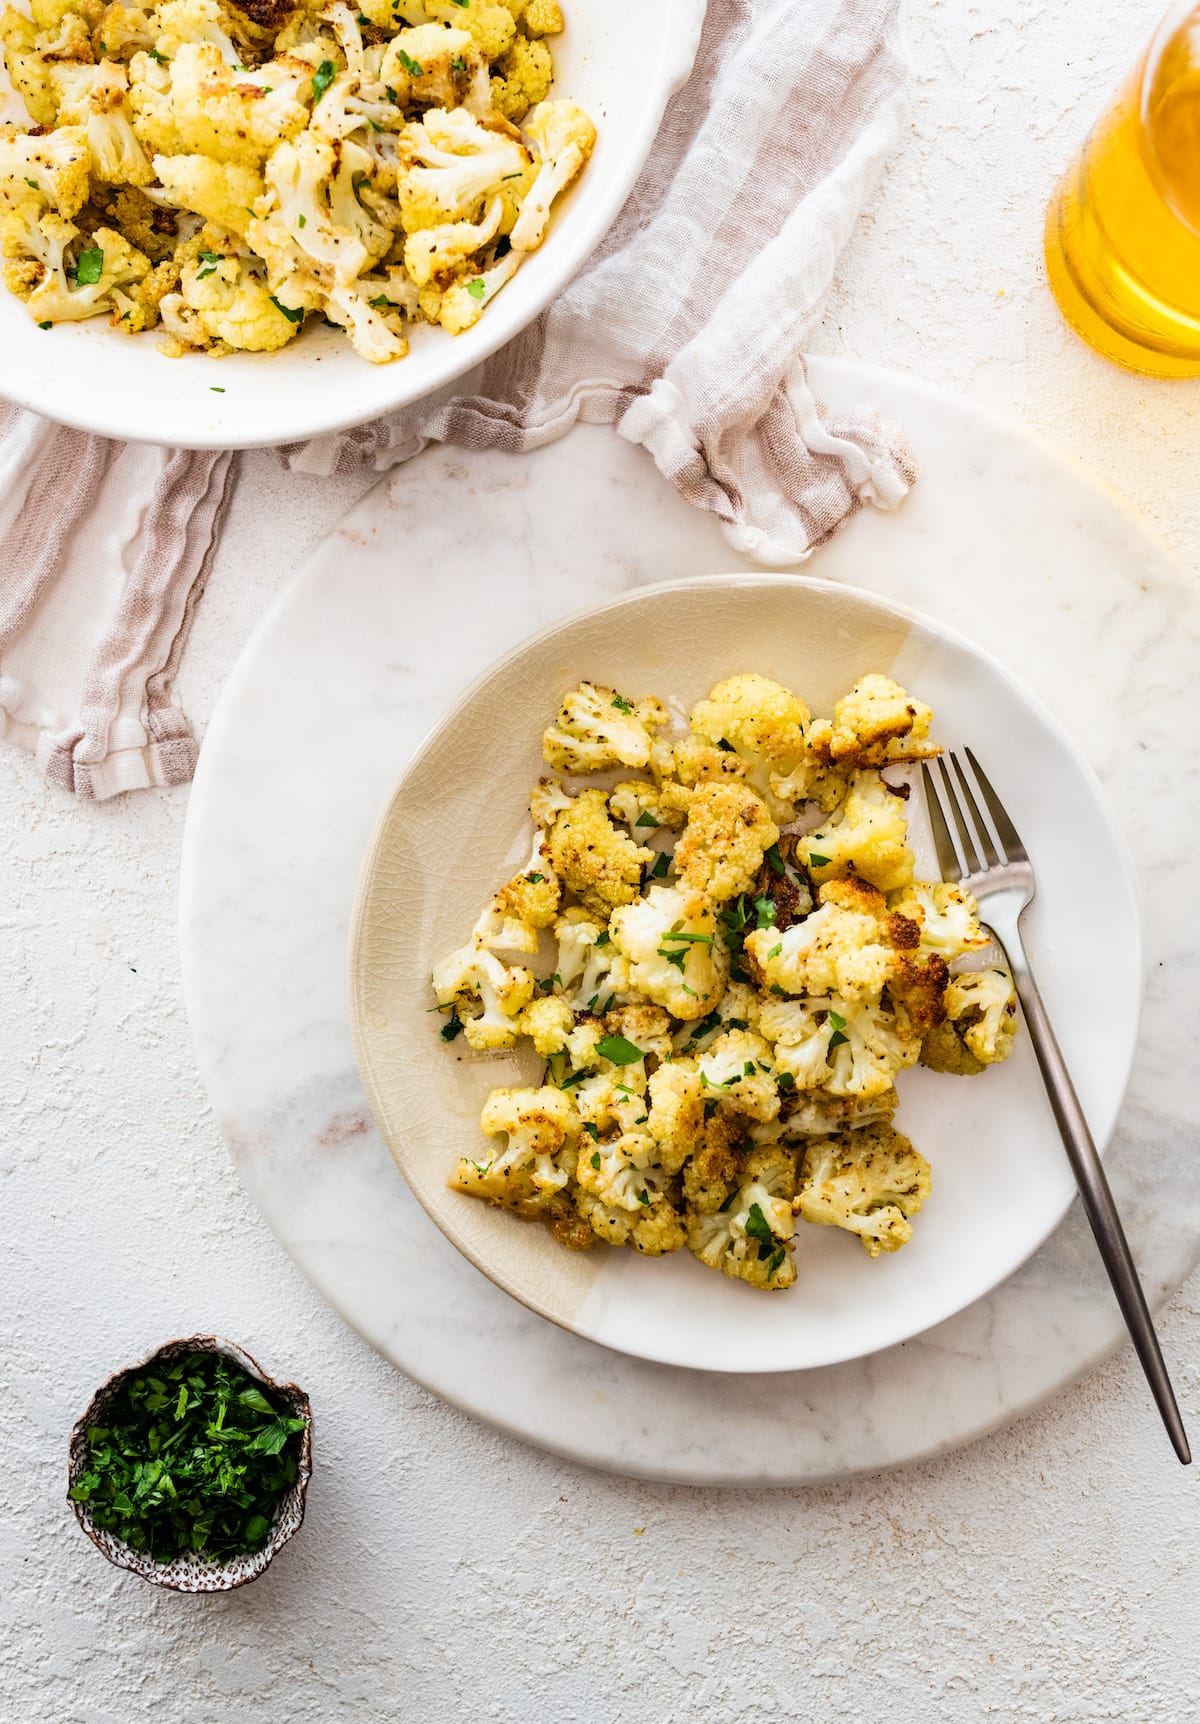 A plate of roasted cauliflower topped with fresh parsley served with a fork.